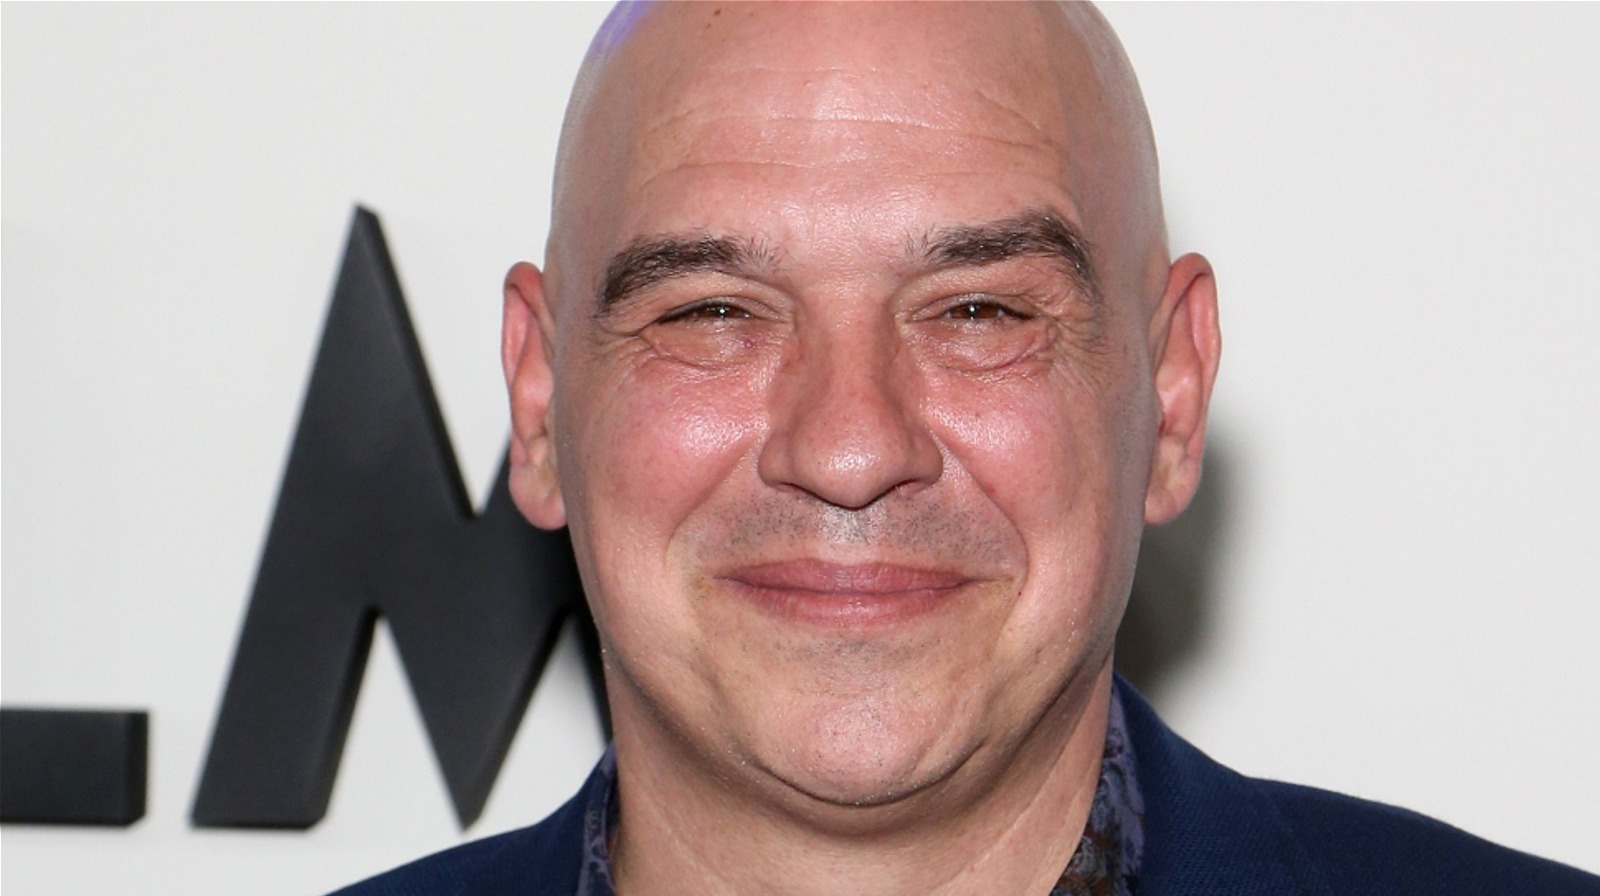 Michael Symon's Quick Tip For Cleaning Restaurant Ovens